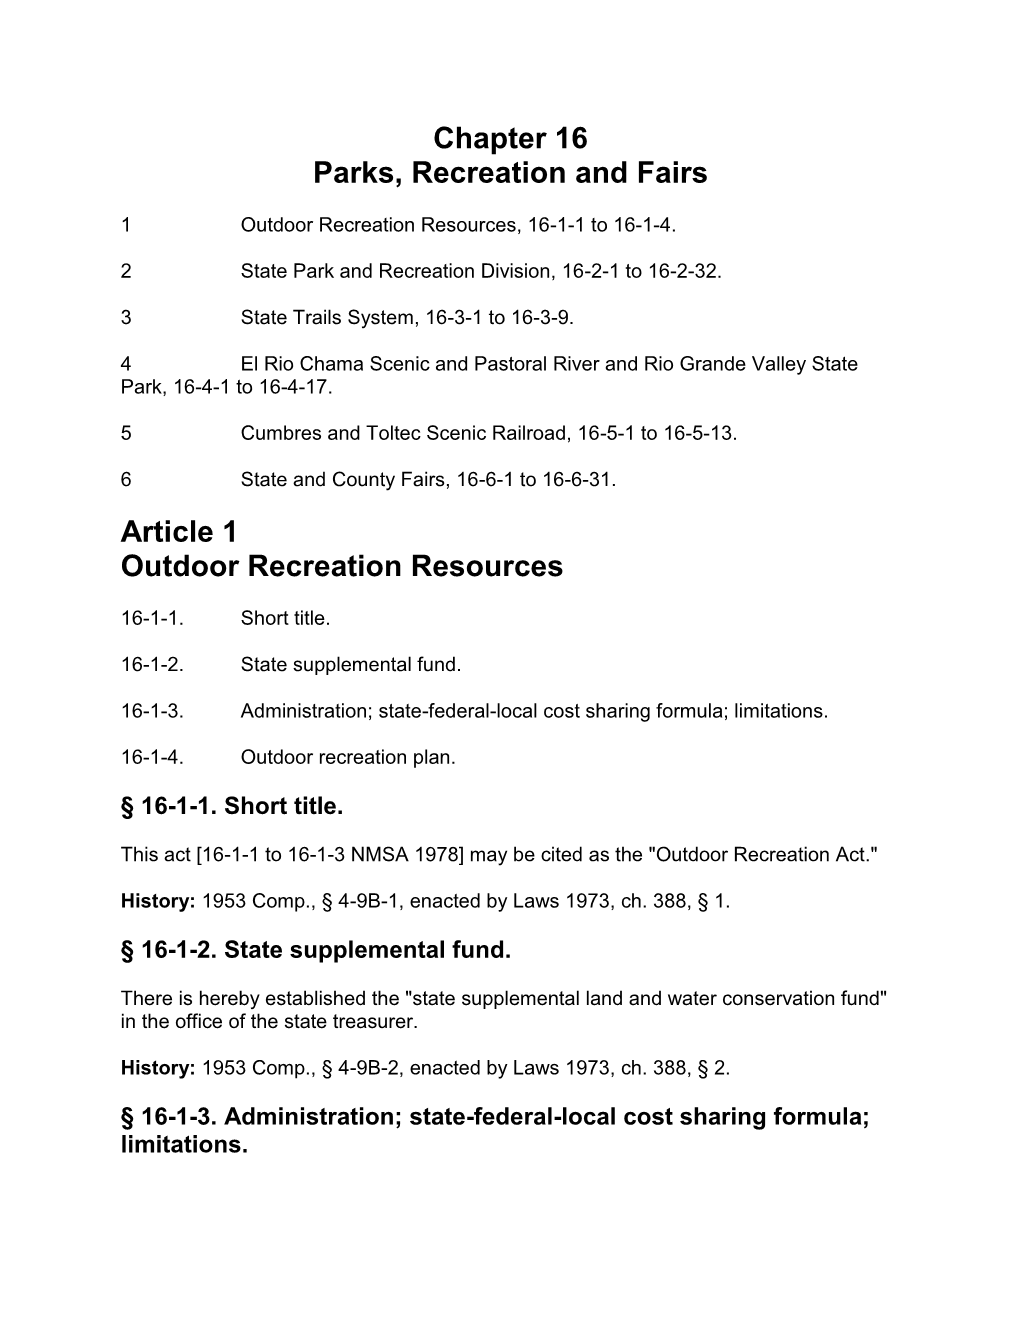 Chapter 16 Parks, Recreation and Fairs